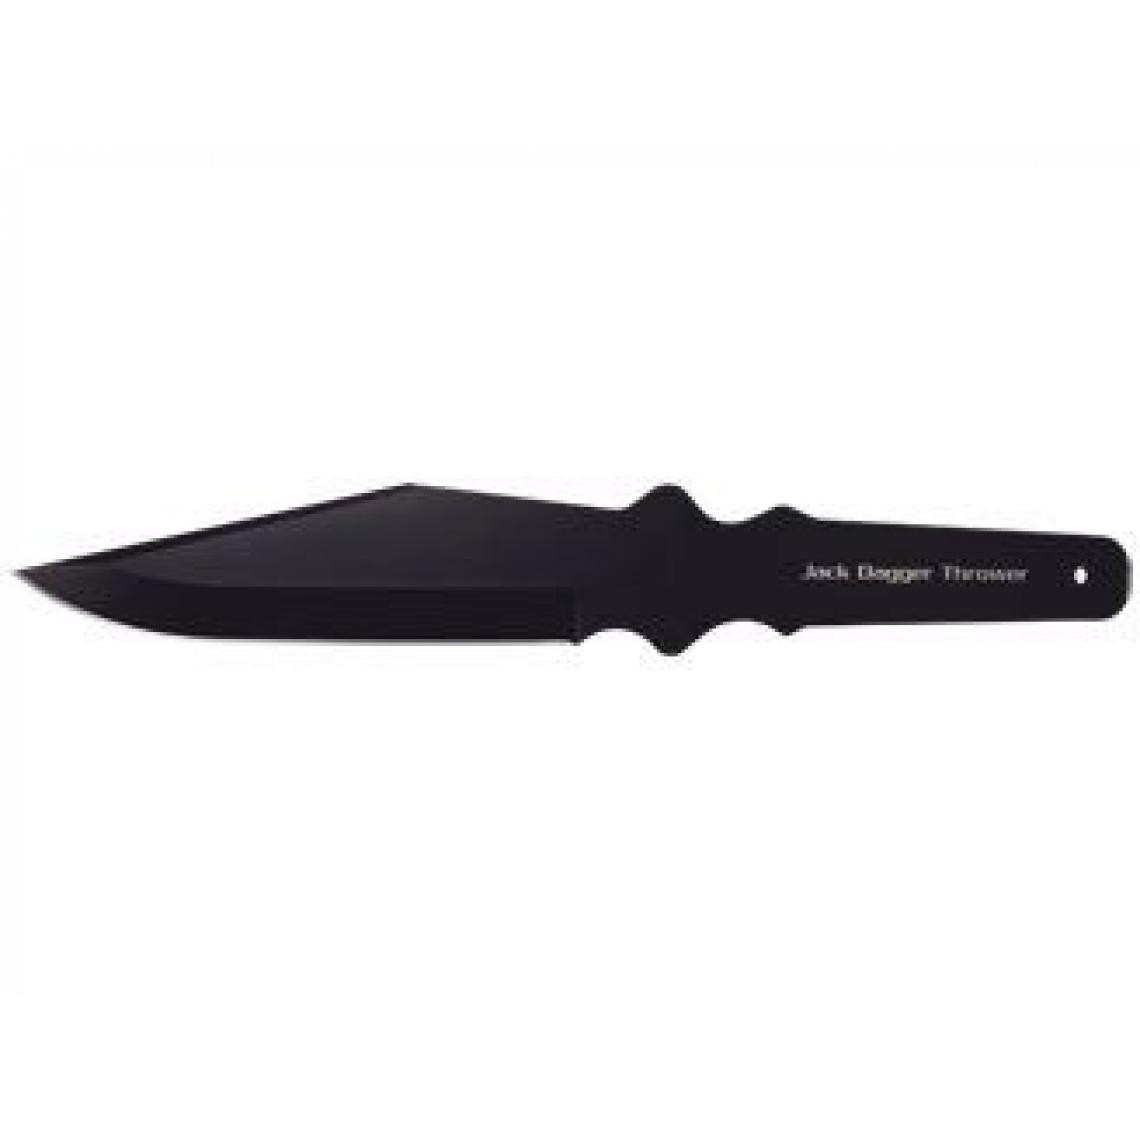 Divers Marques - Cold Steel JACK DAGGER THROWER 80TJDZ - Outils de coupe